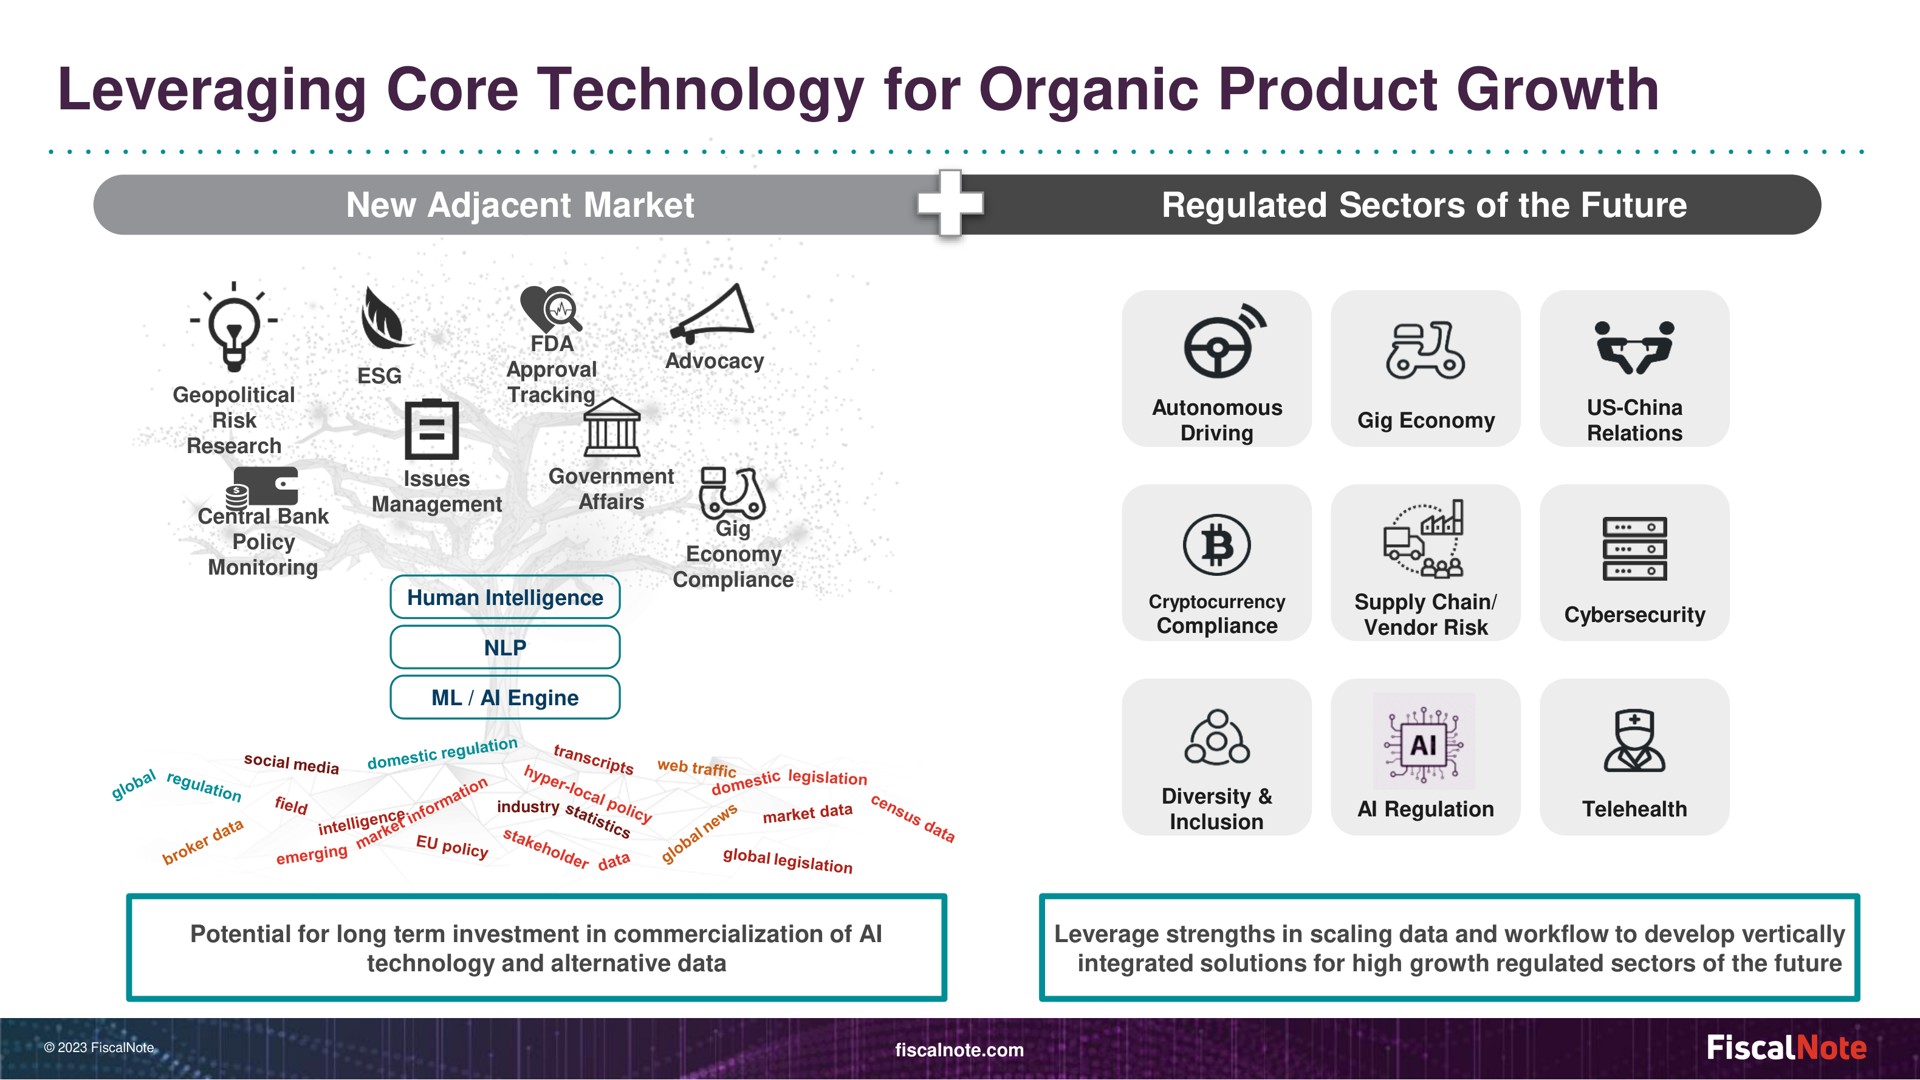 leveraging core technology for organic product growth new adjacent market opportunities regulated sectors of the future policy | FiscalNote